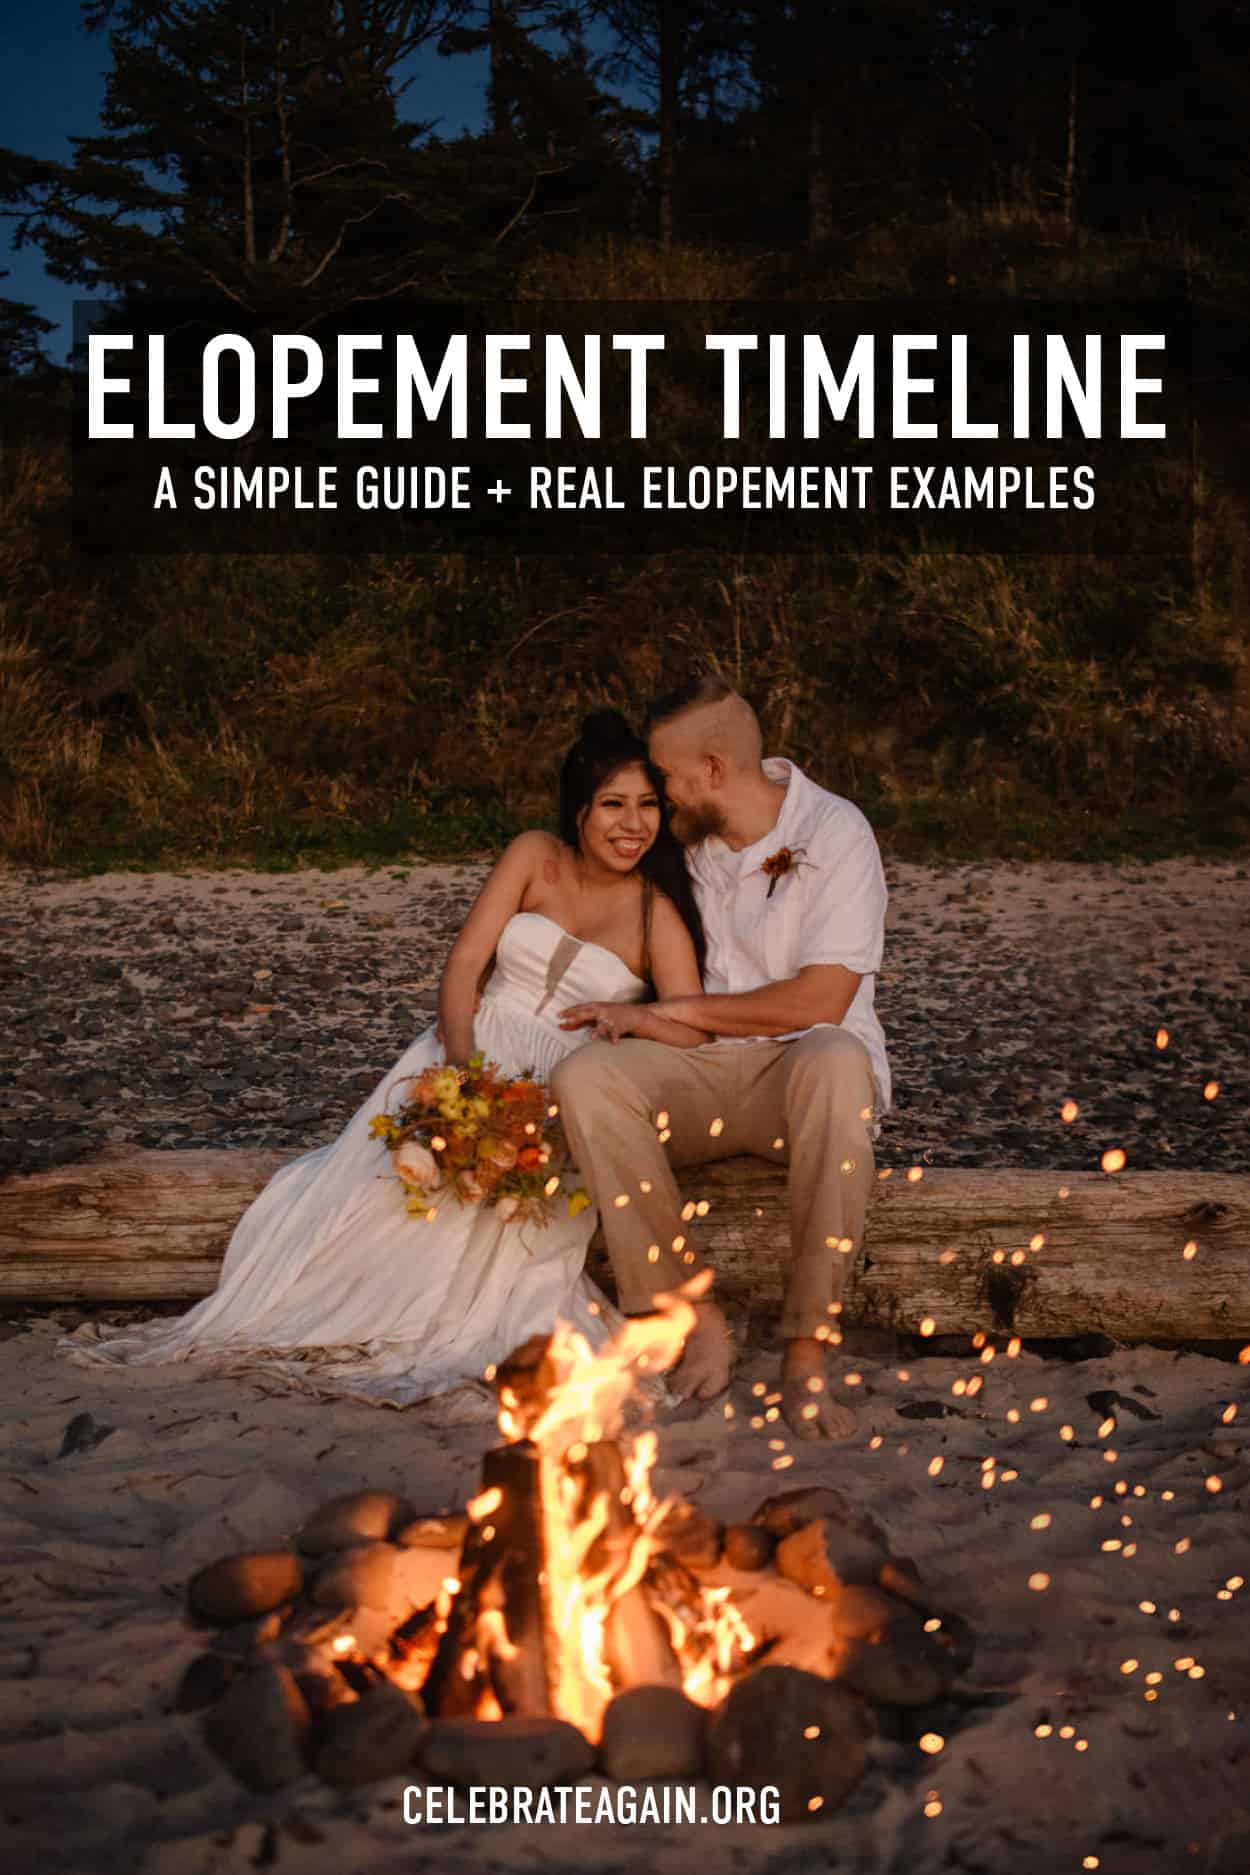 Elopement timeline a simple guide + real example as couple cuddles near a beach fire after eloping